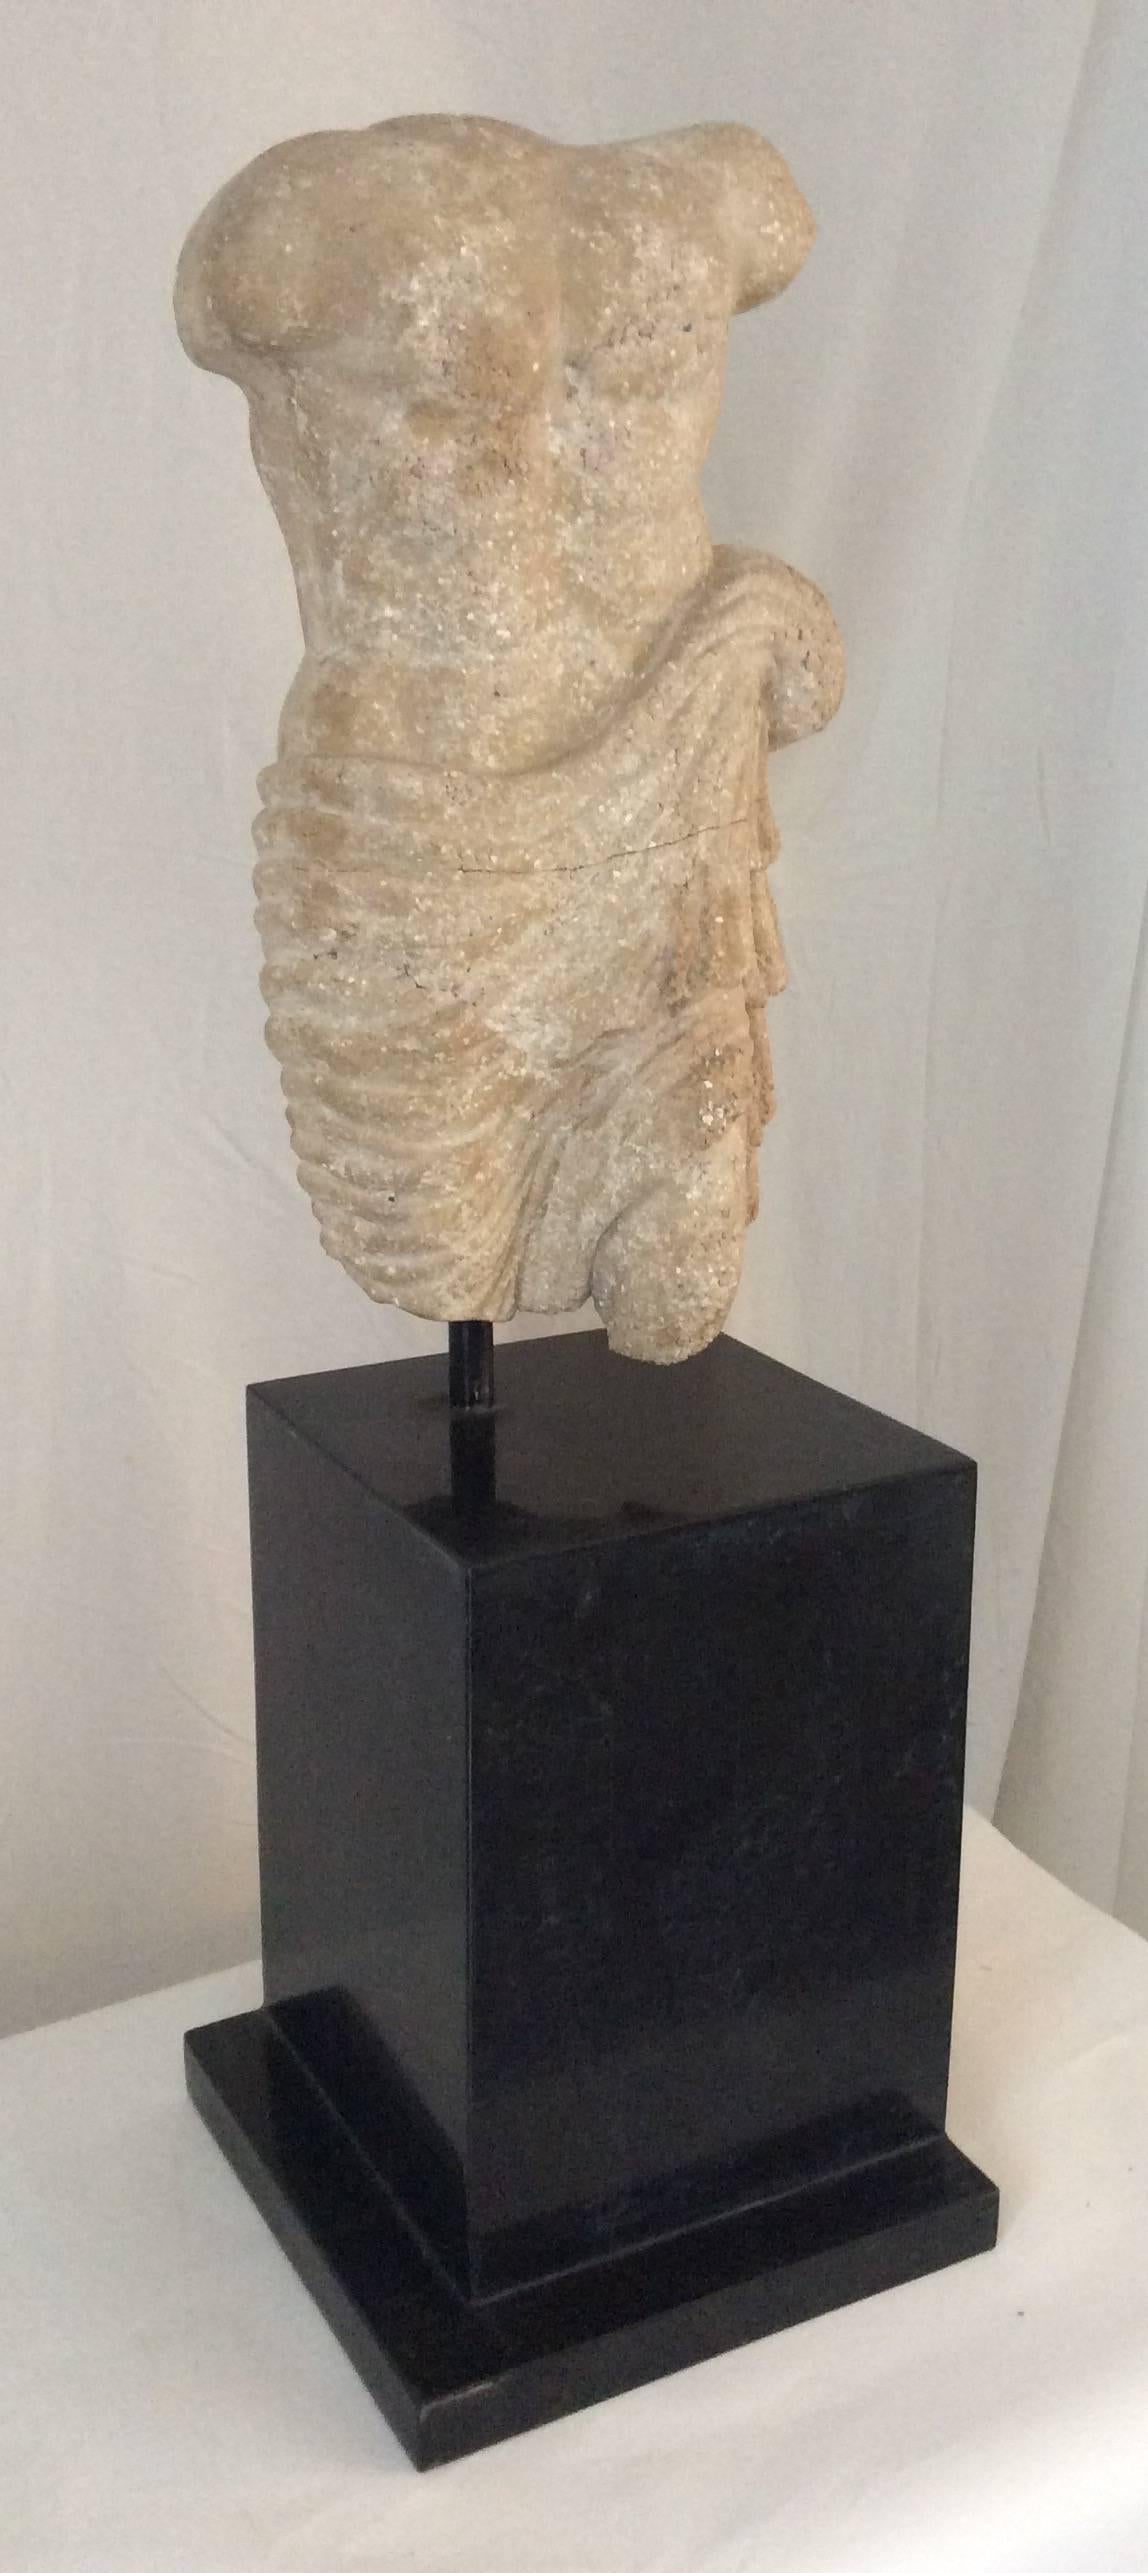 You are looking at a very decorative stone sculpture of a Greco / Roman male torso. Don't know exact age for I don't espcialize in this type of thing. I do know it's vintage. It appears to be made of some kind of stone. The sculpture rest on a